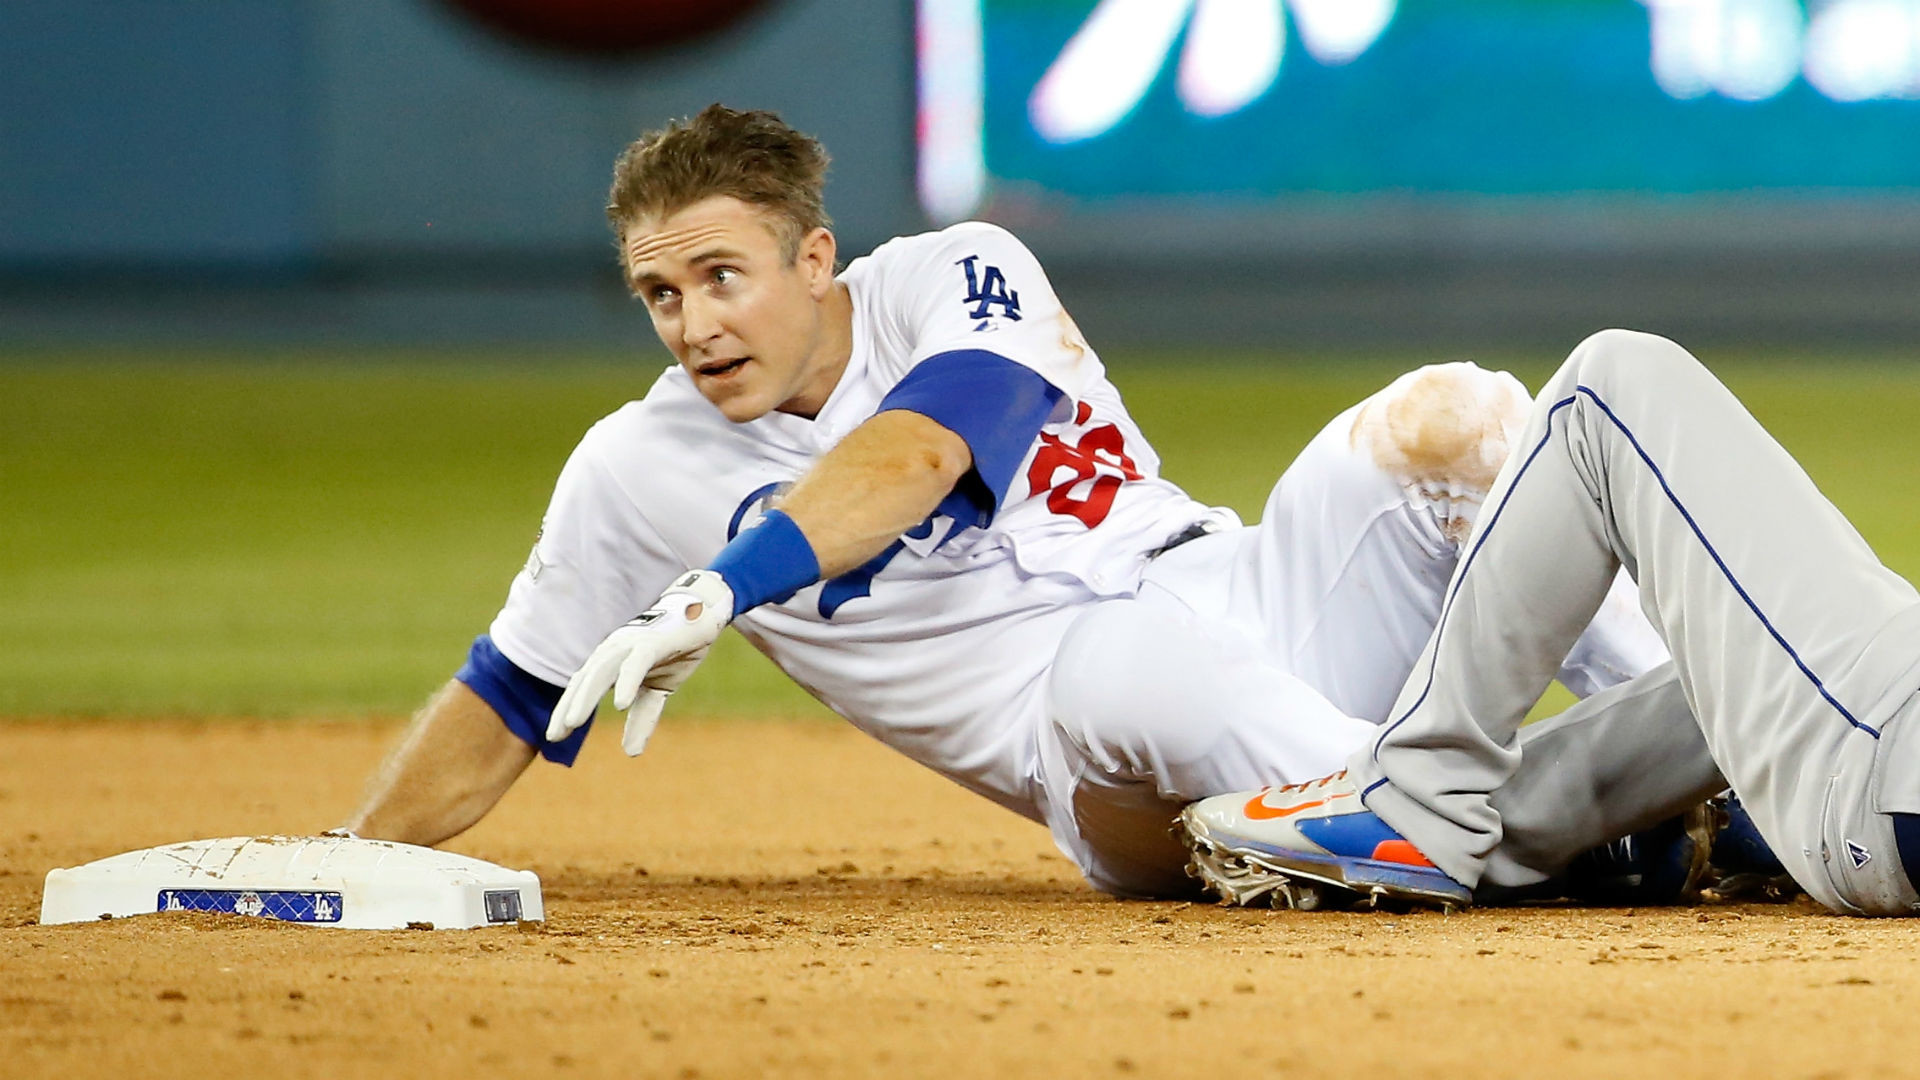 1920x1080 Chase Utley's appeal reportedly won't be heard until after NLDS | MLB |  Sporting News